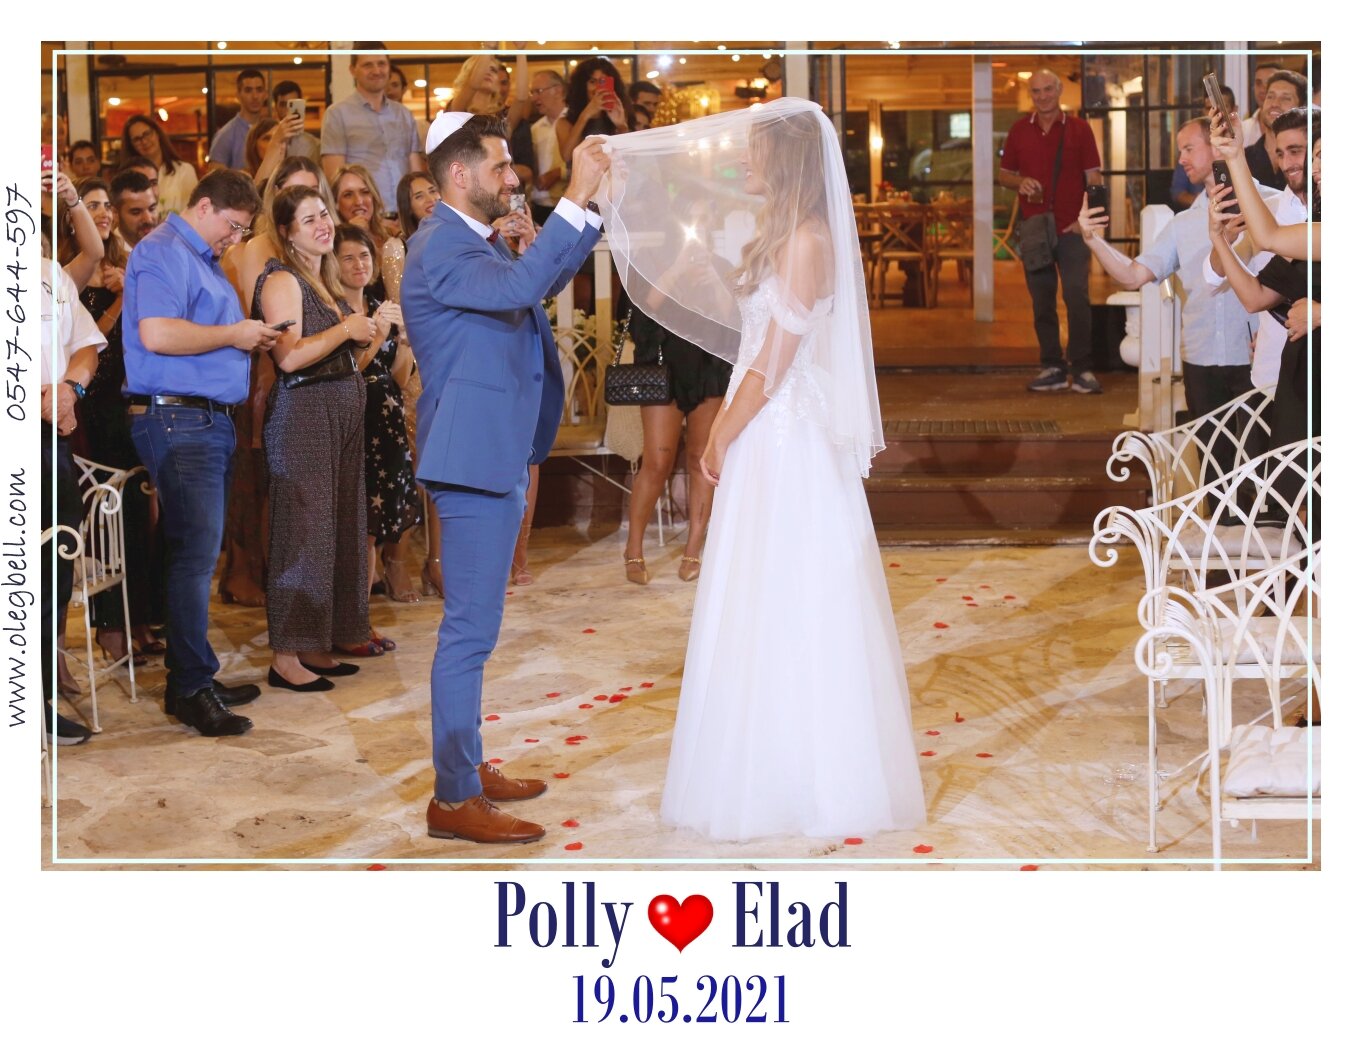 POLLY_AND_ELAD_WD_MG_SITE_020.JPG